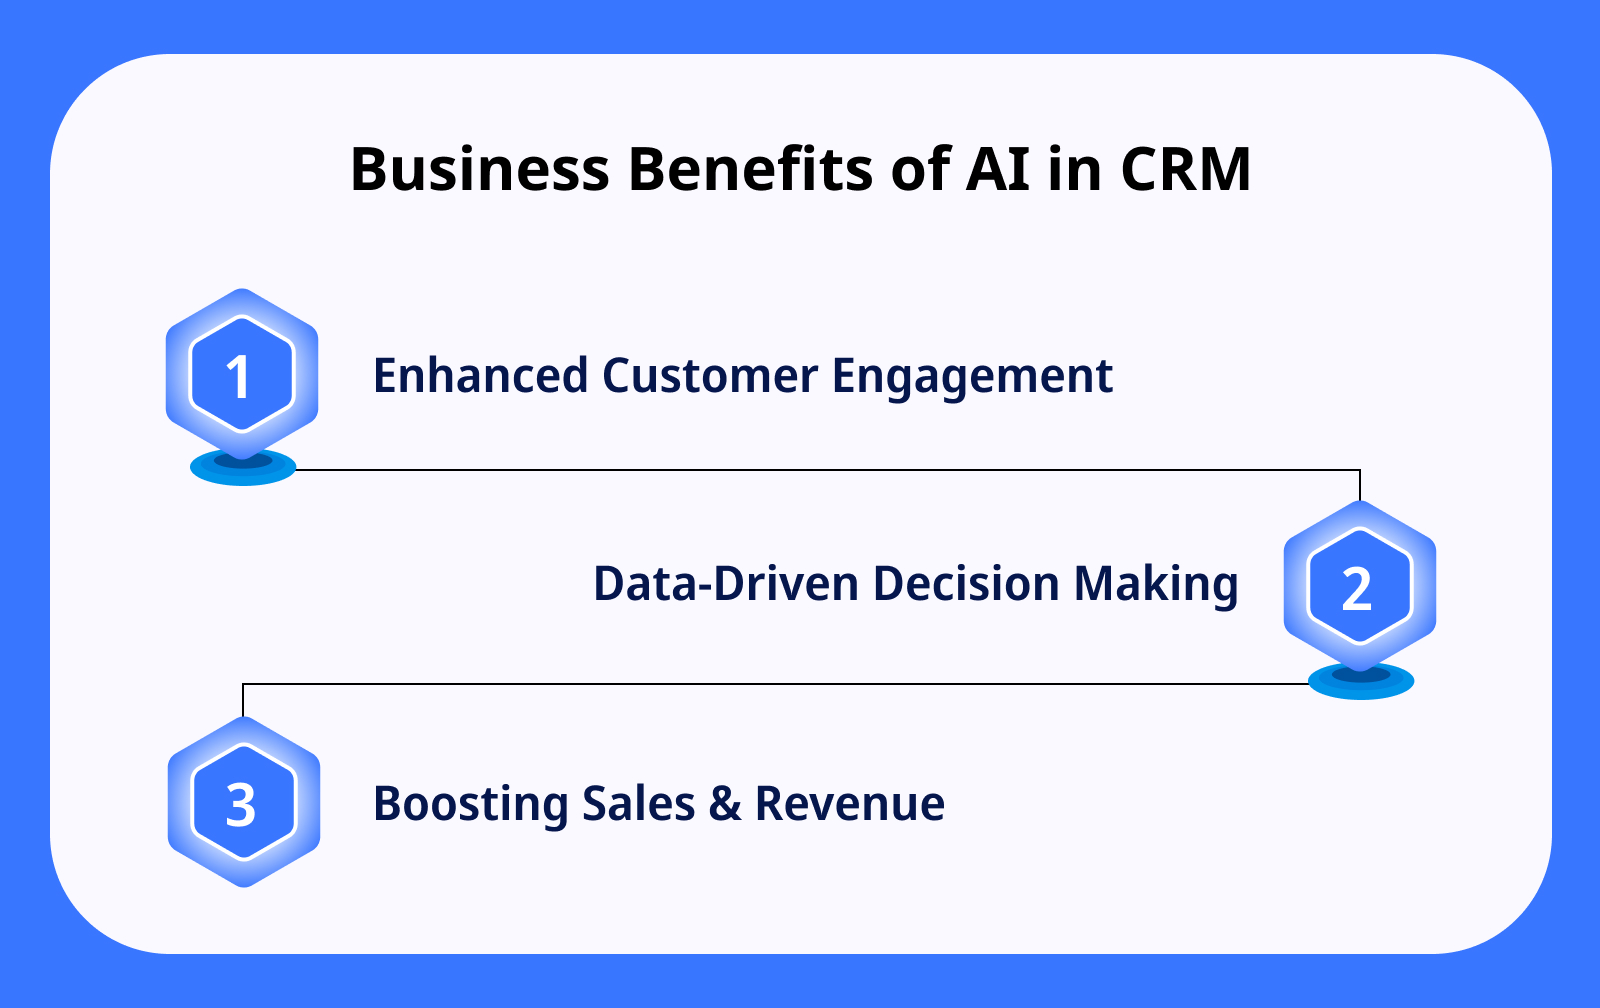 Business Benefits of AI in CRM